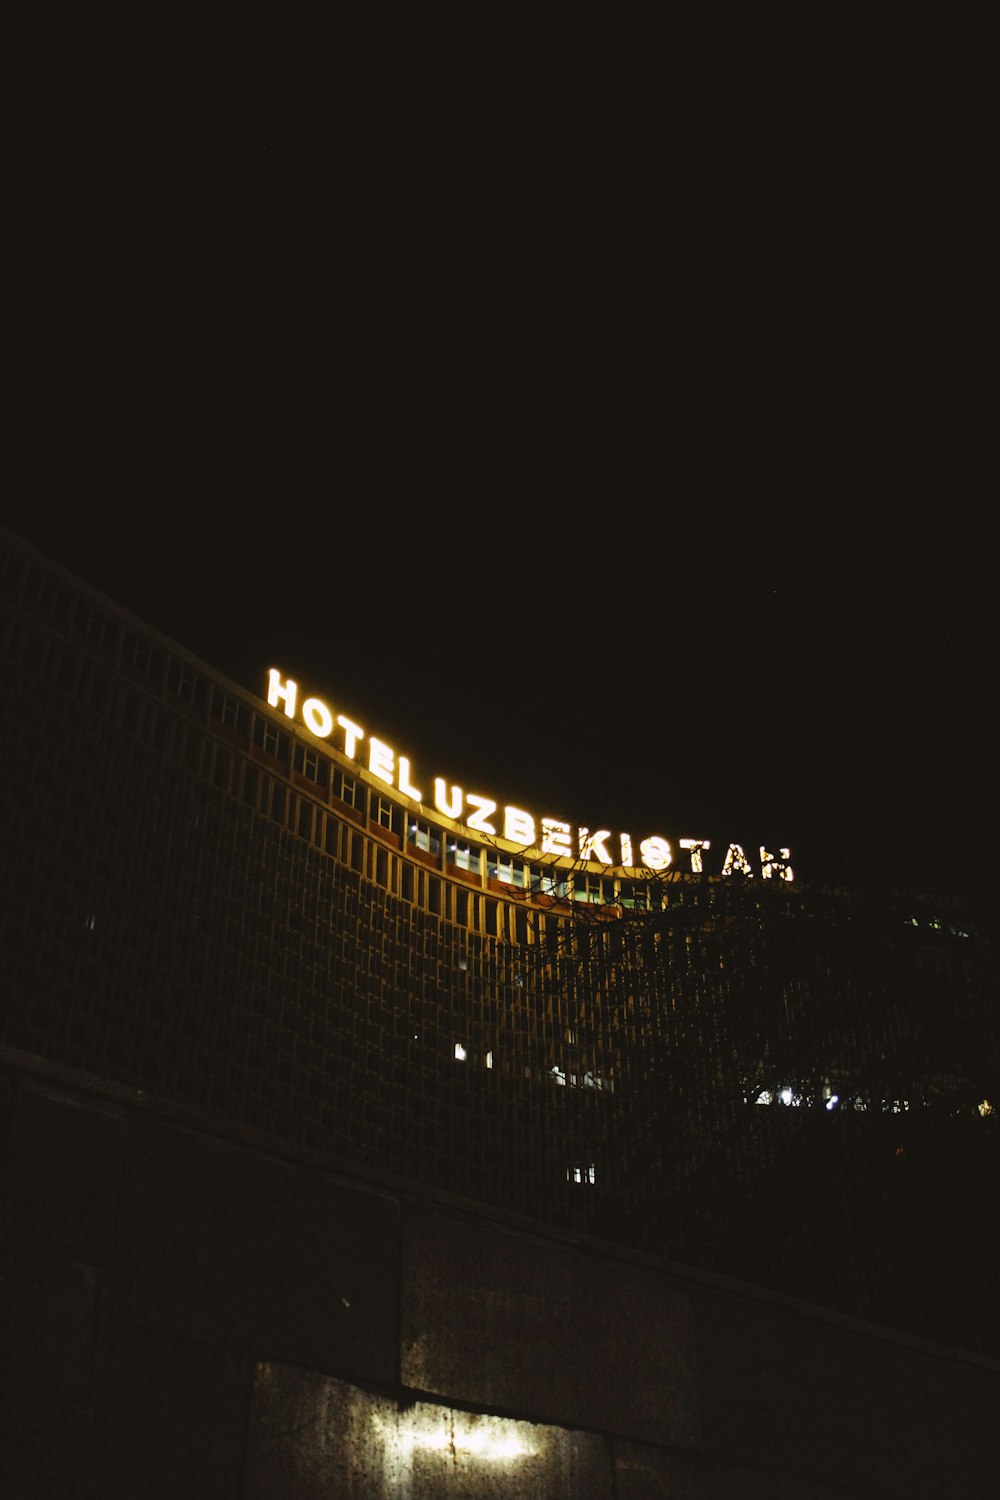 a hotel sign lit up in the dark